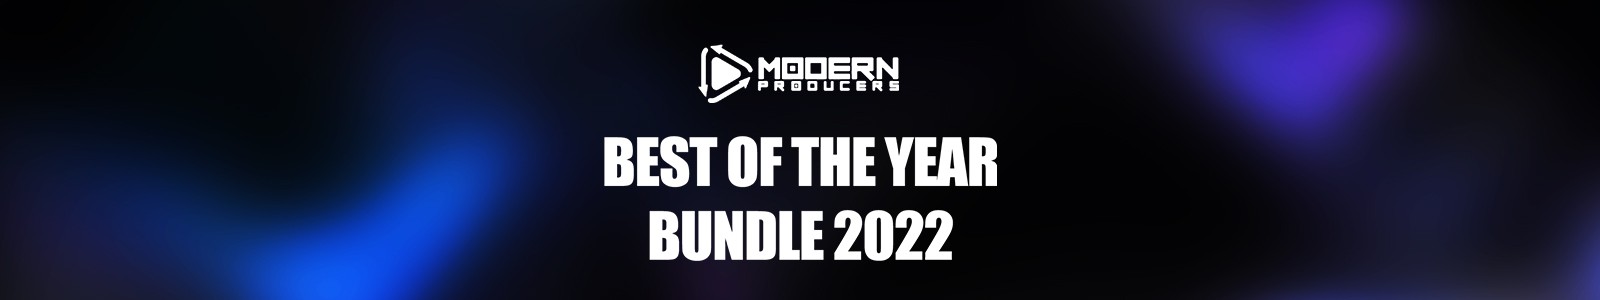 Best of 2022 Producer Bundle by Modern Producers